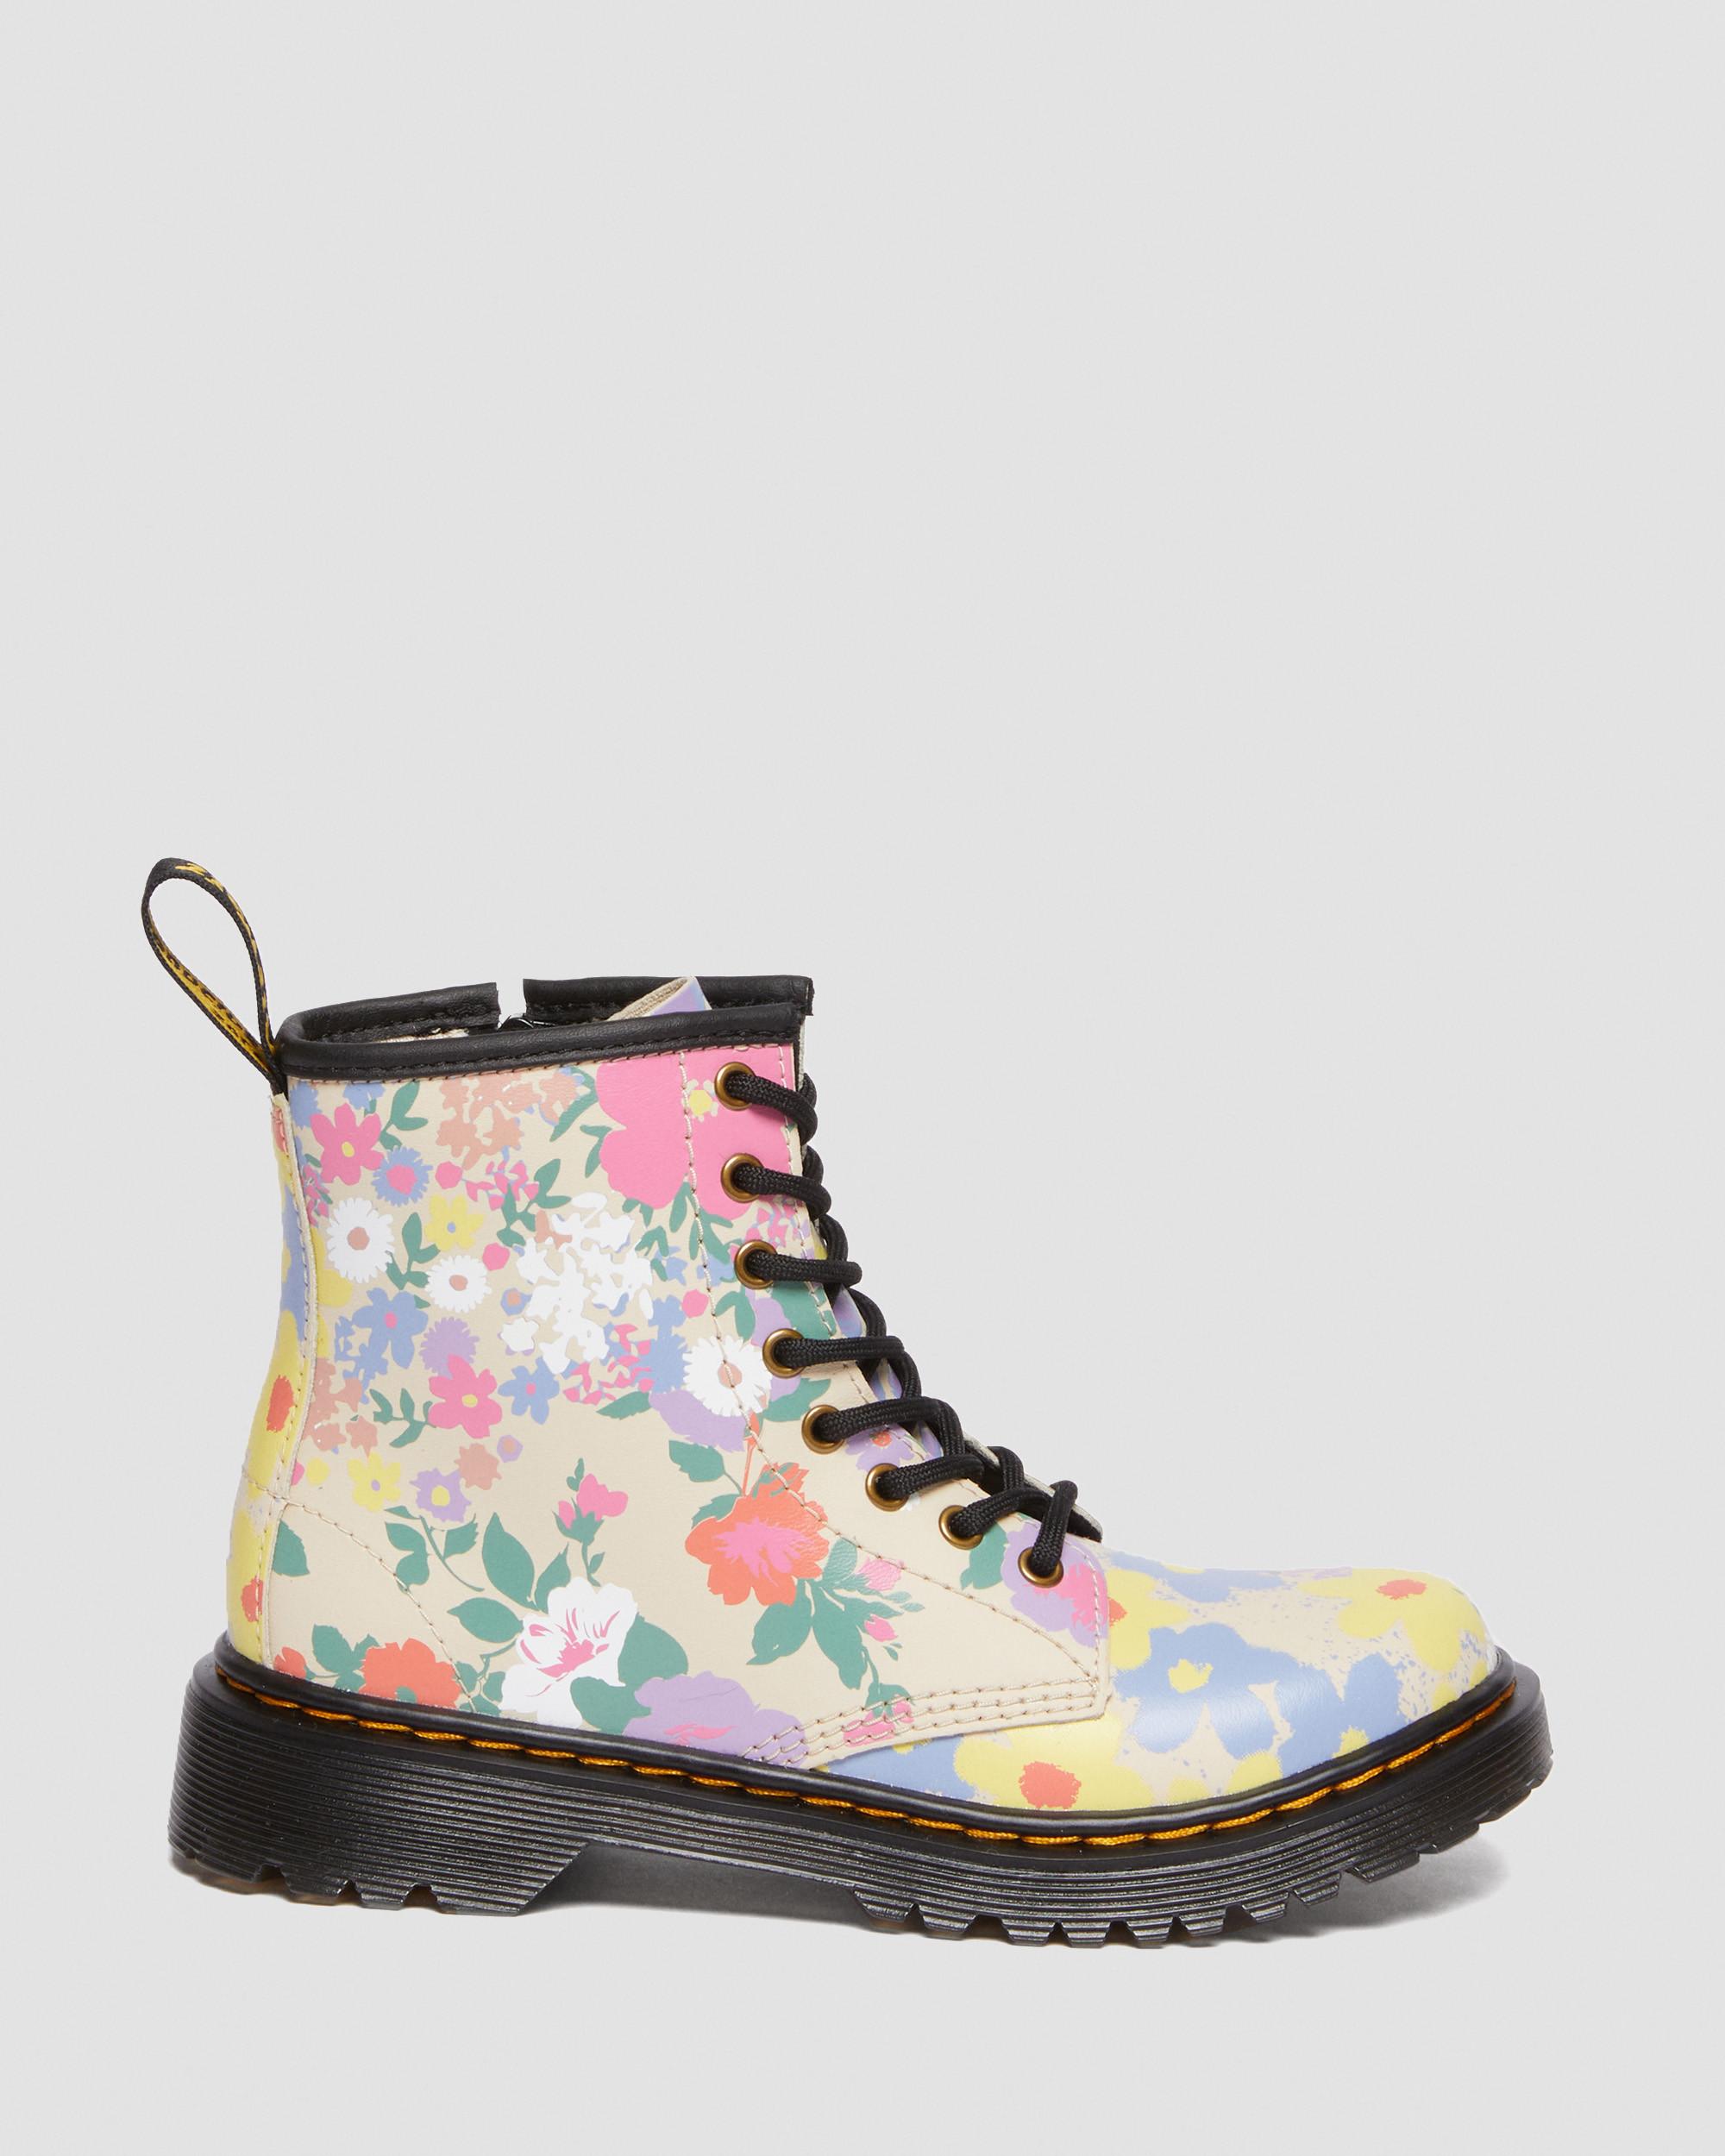 Junior 1460 Floral Mash Up Hydro Leather Lace Up BootsJunior 1460 Floral Mash Up Hydro Leather Lace Up Boots Dr. Martens